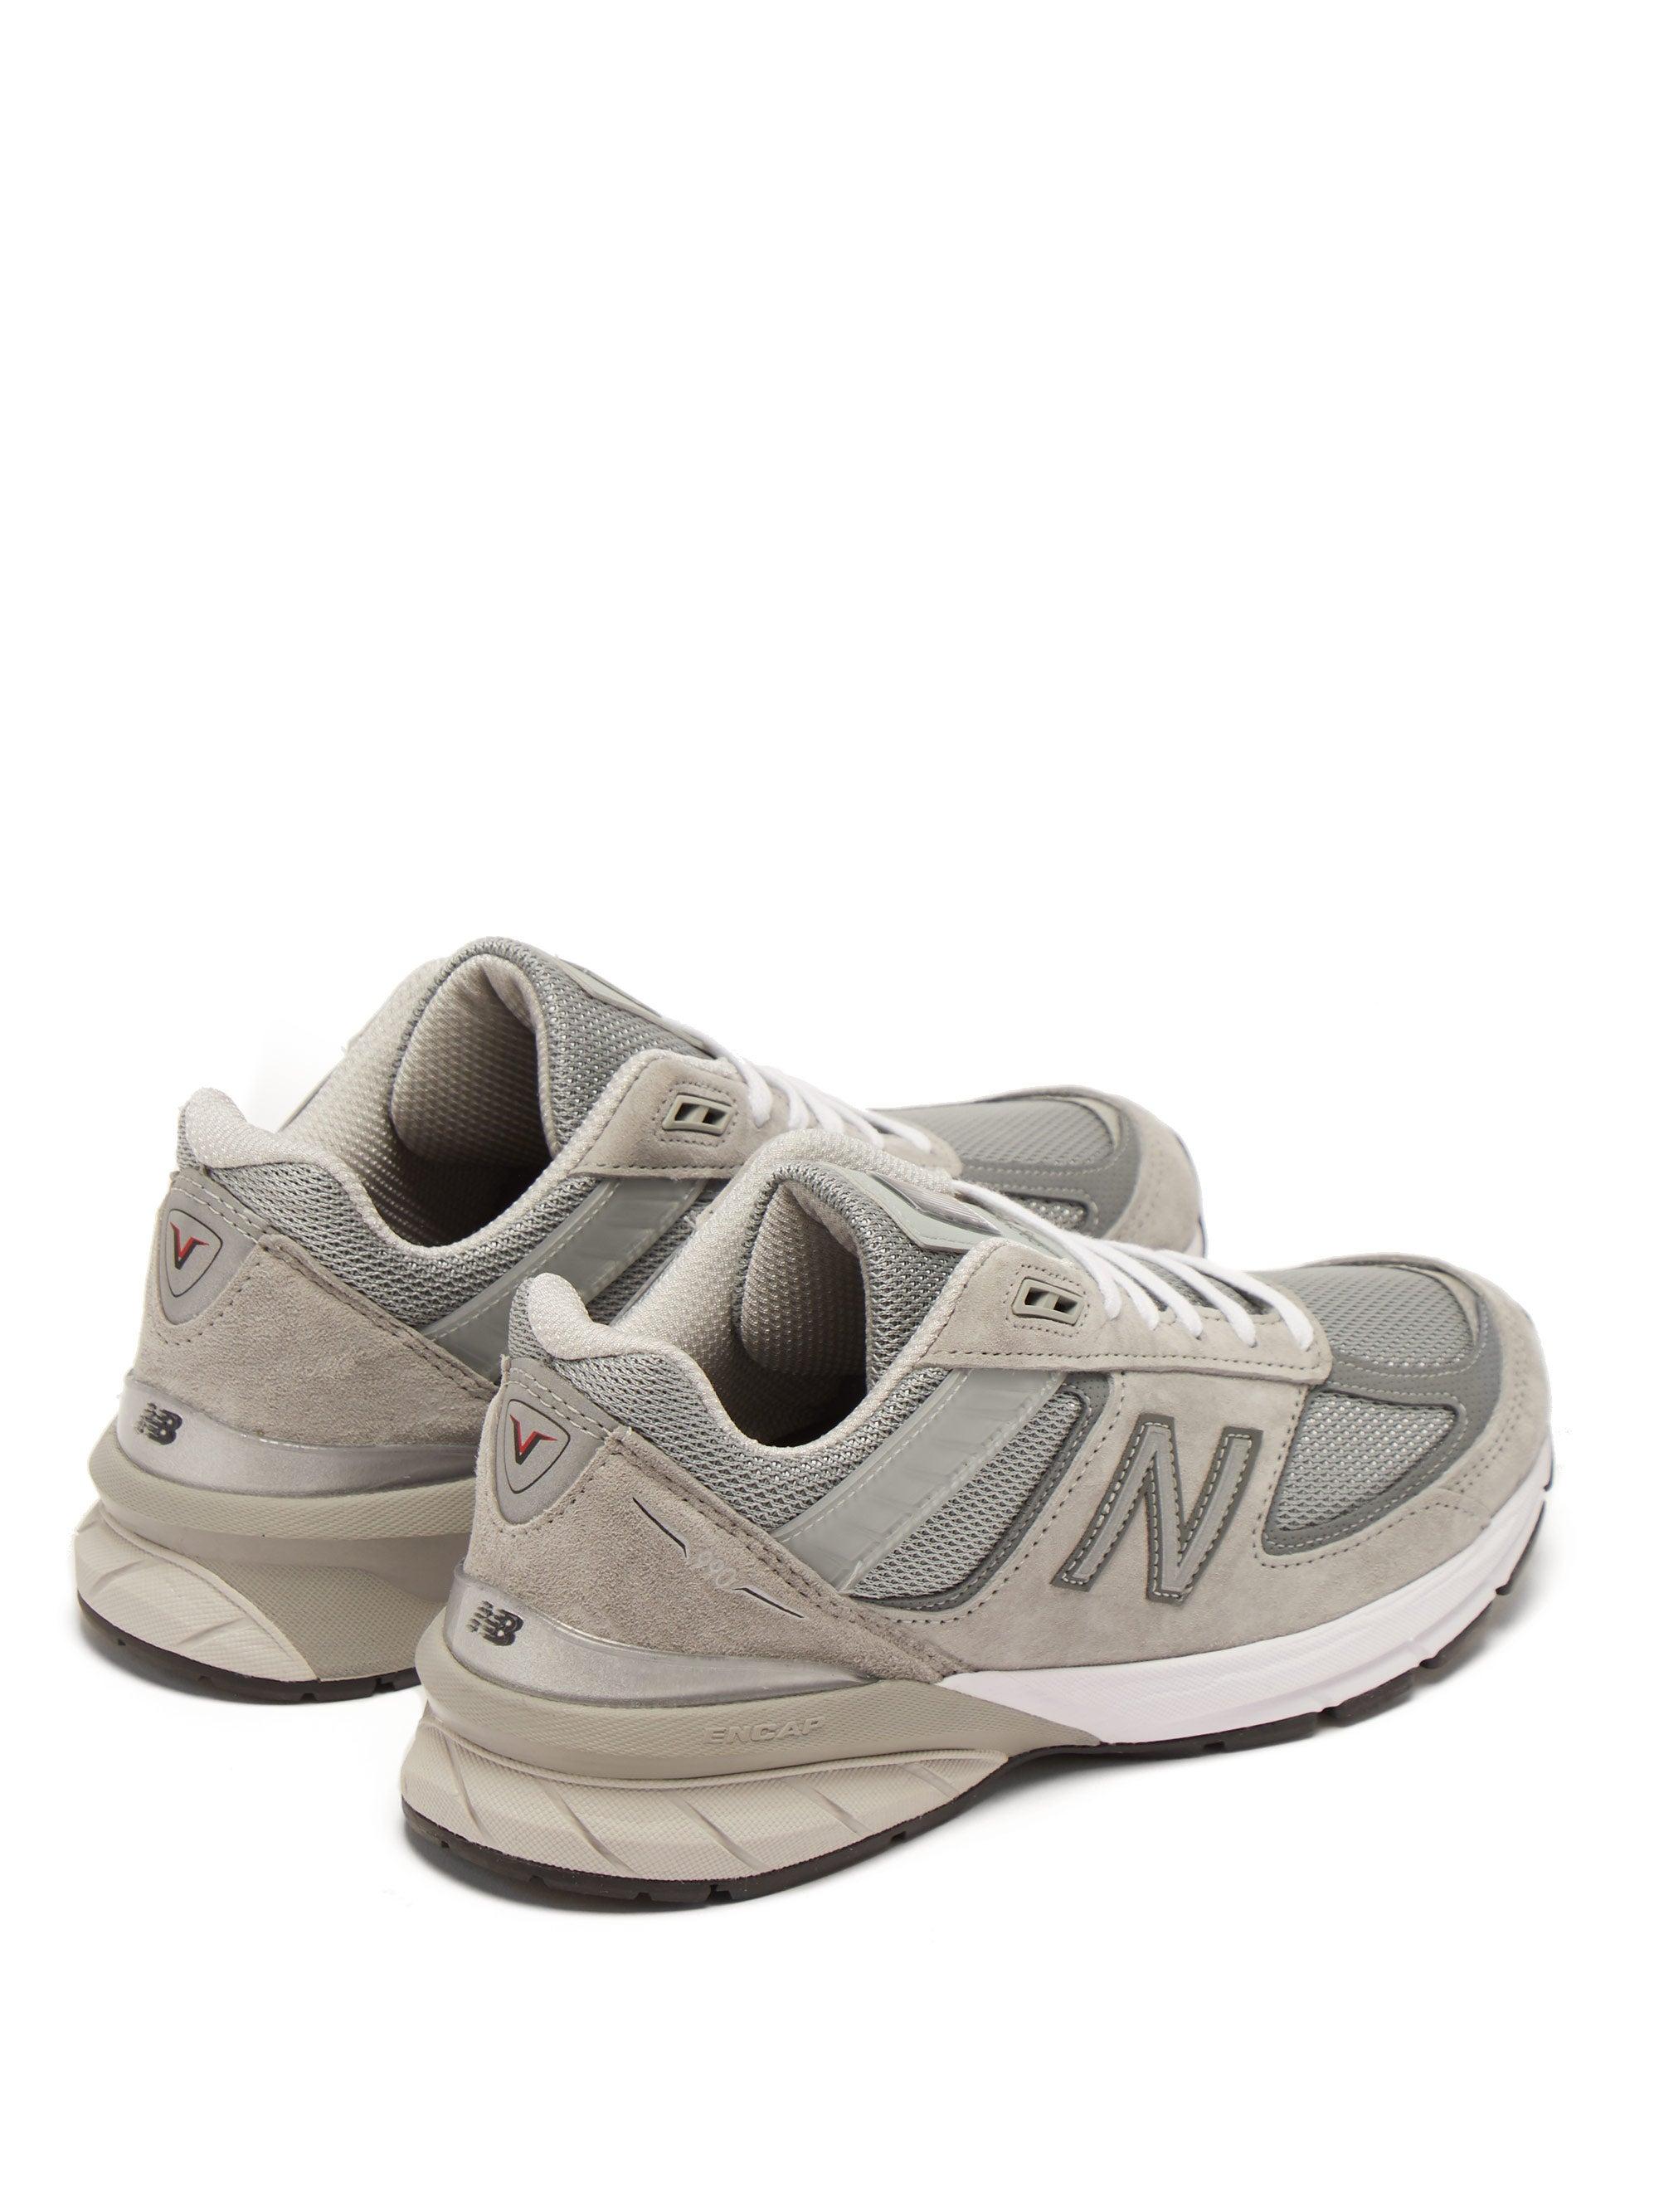 New Balance 990v5 Suede And Mesh Trainers in Grey | Lyst Australia